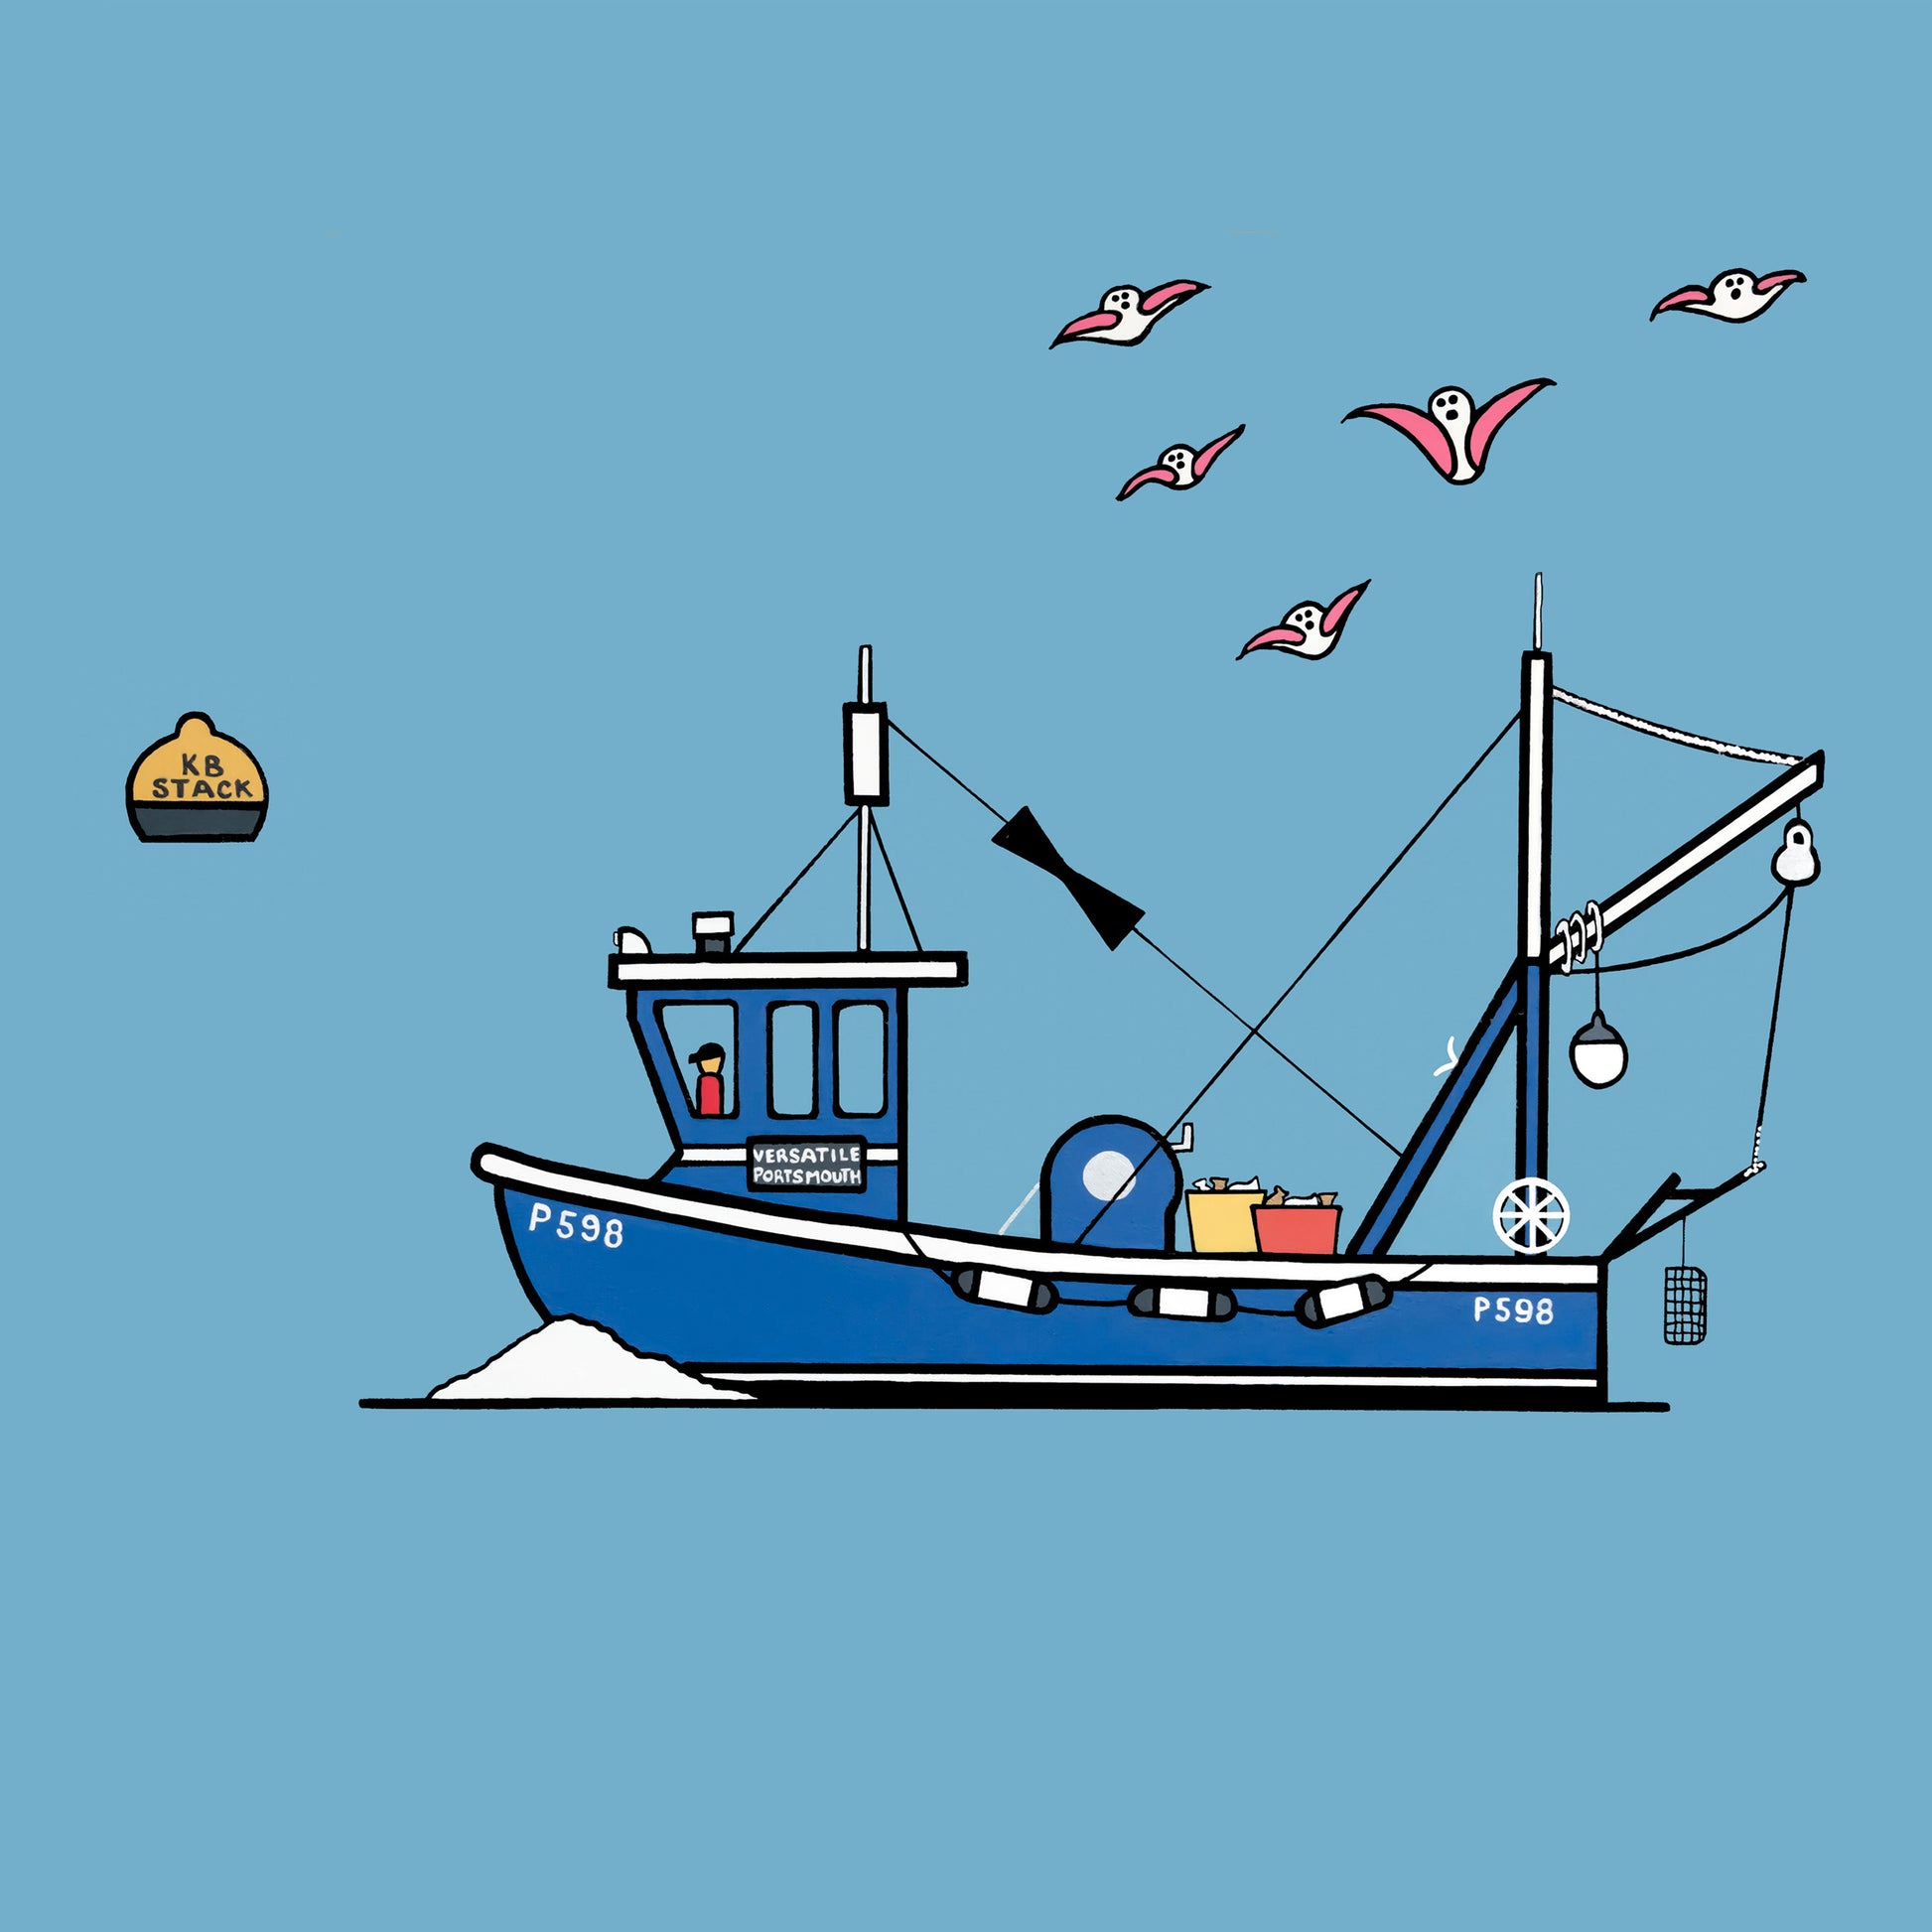 The artwork is called something fishy. The background is blue with a fishing boat. A buoy is floating with five pink winged seagulls flying above the boat in the sky. The fishing boat has lots of details of fishing baskets, floats and a small figure steering the boat.